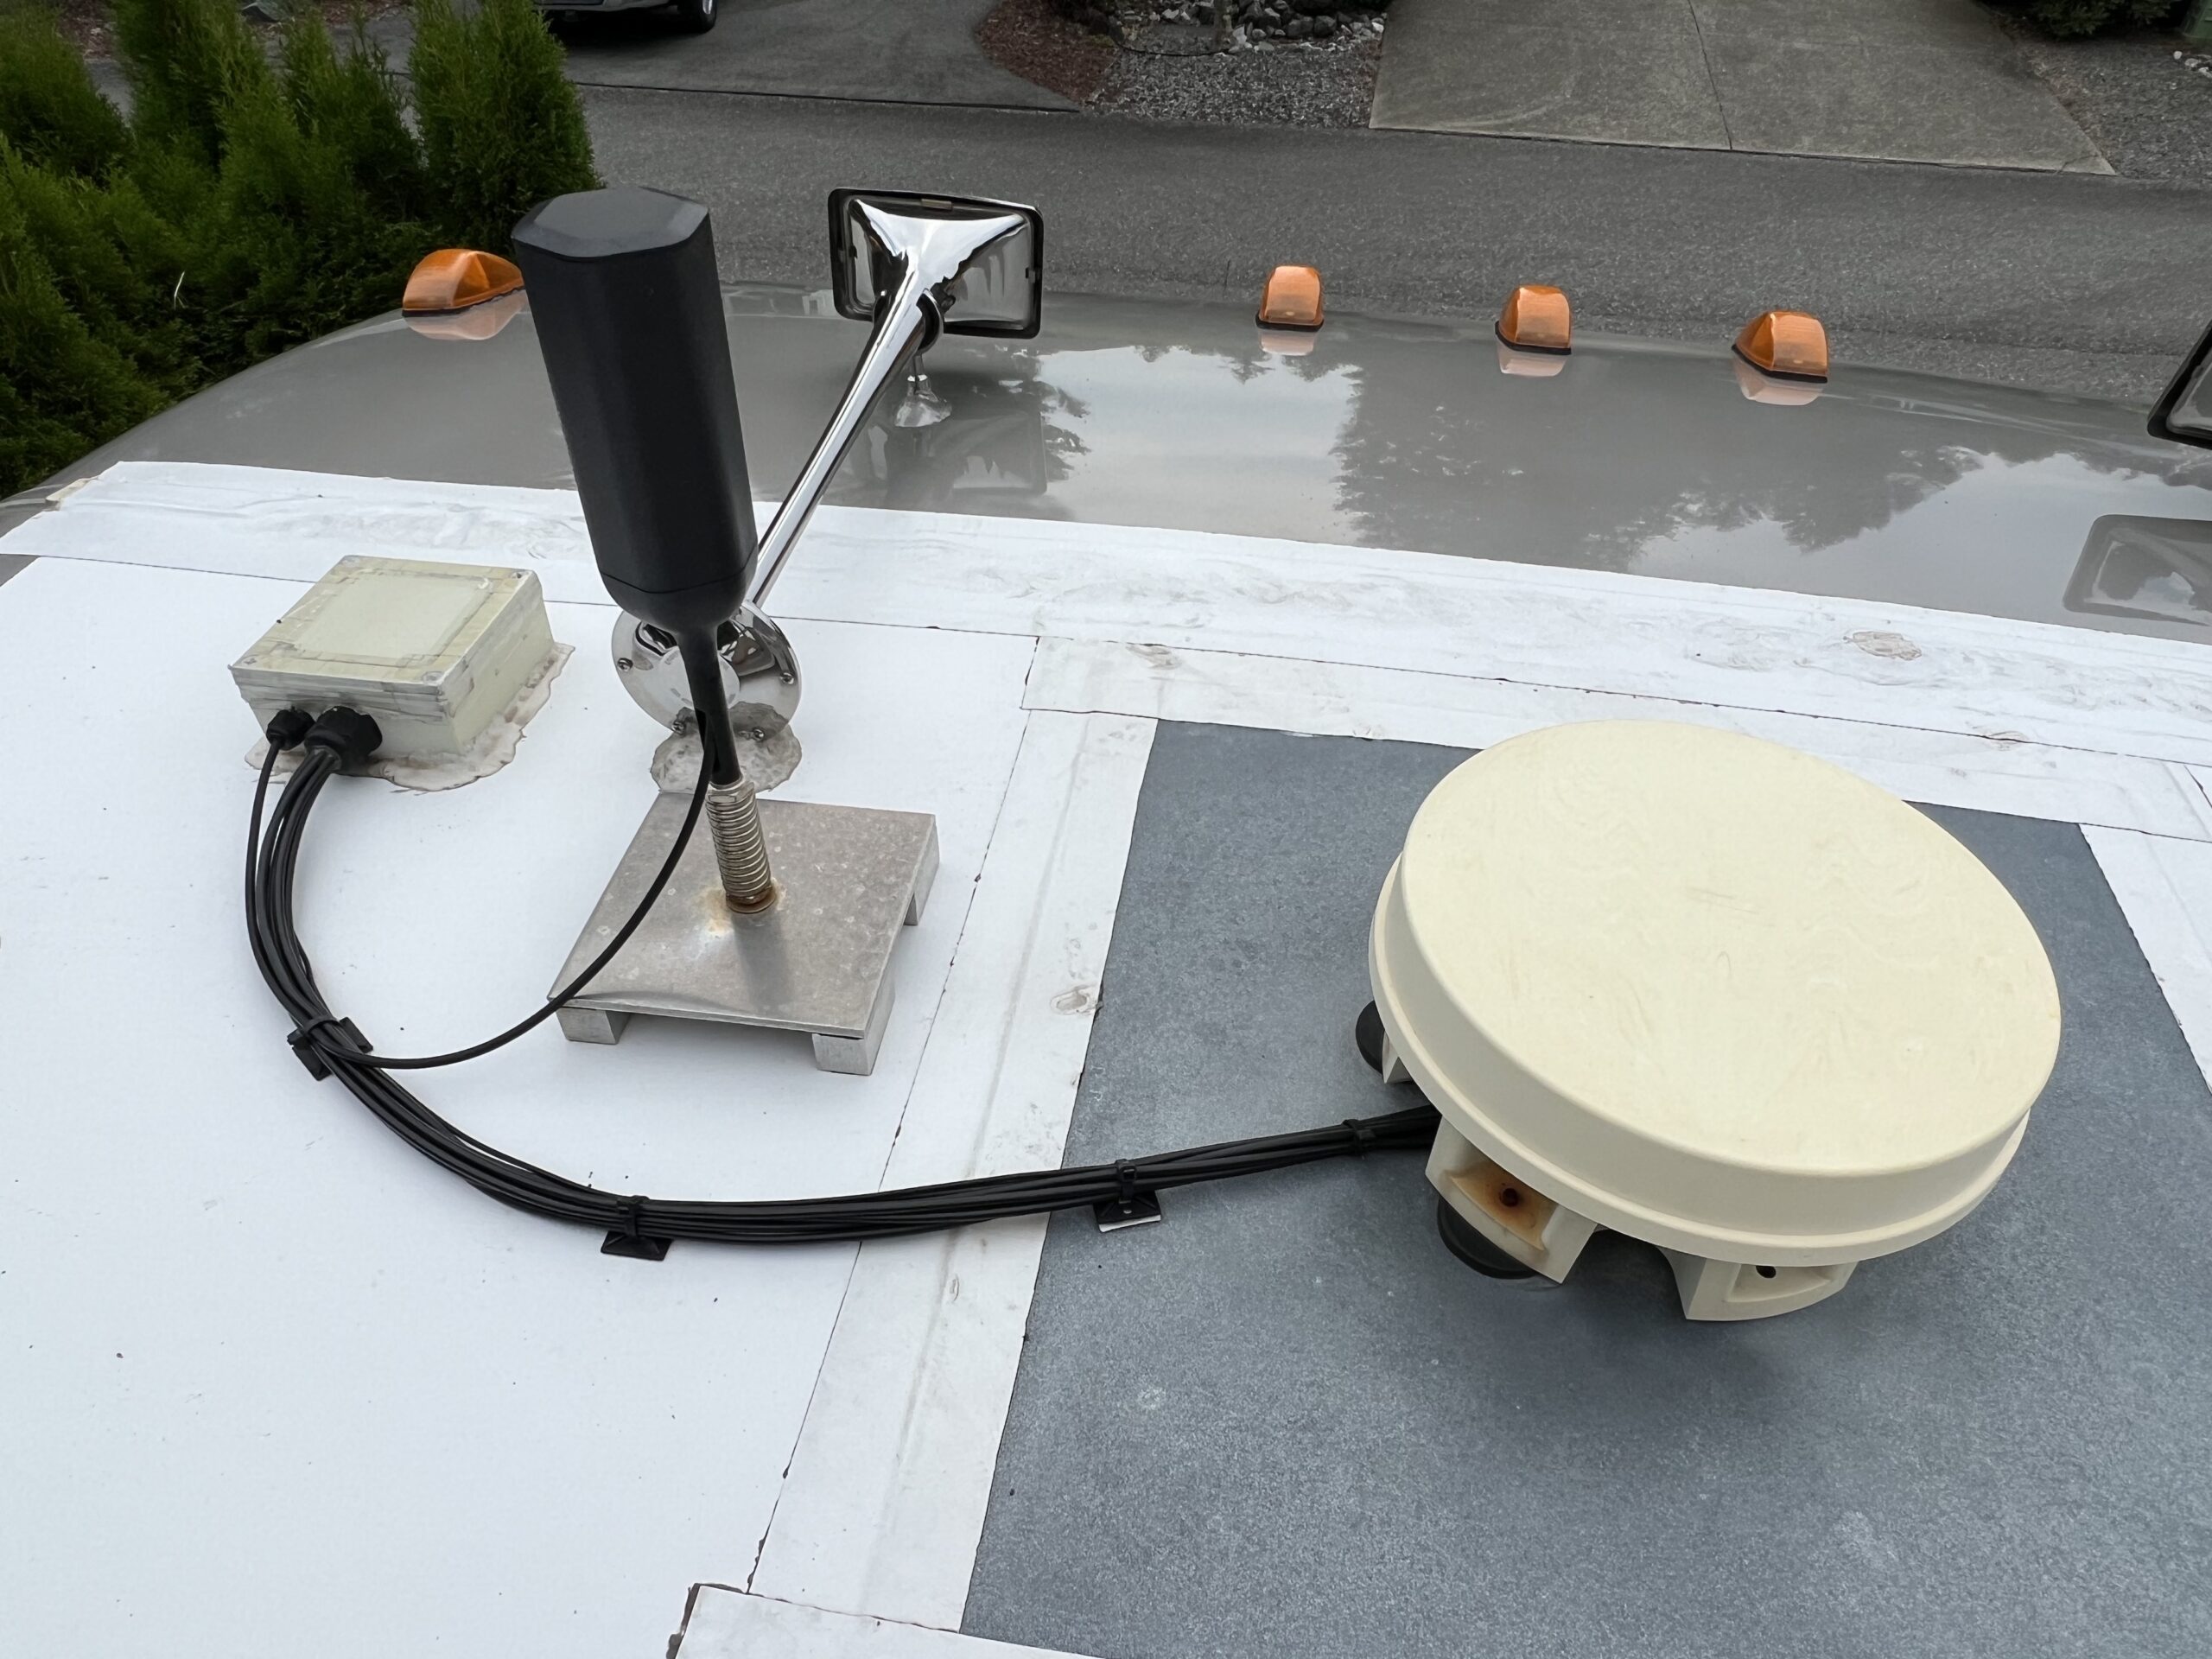 Antennas for the WeBoost cell booster (left) and Parsec Husky 7 antenna for the Pepwave system (right)